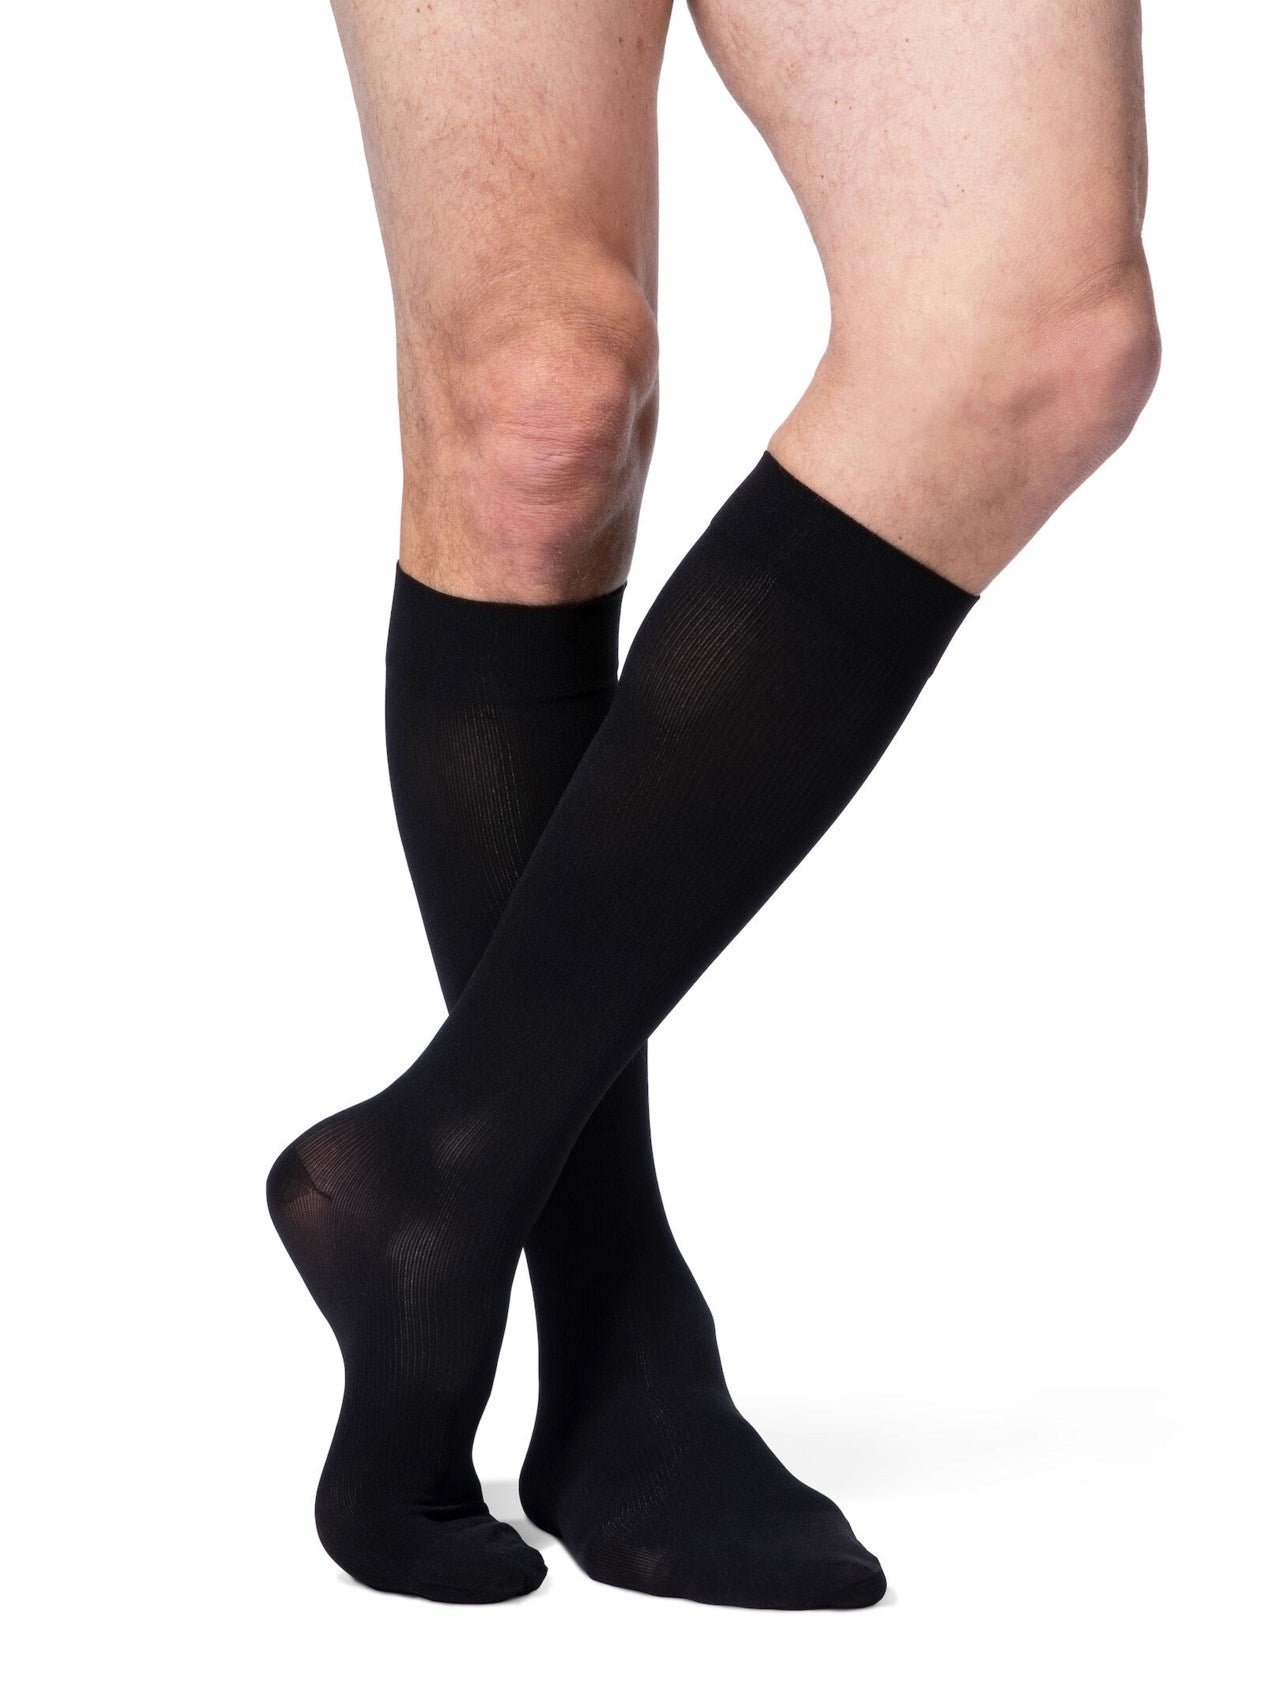 Sigvaris 860 Opaque Compression Socks 30-40 mmHg Calf High w/Grip Top For Women Closed Toe